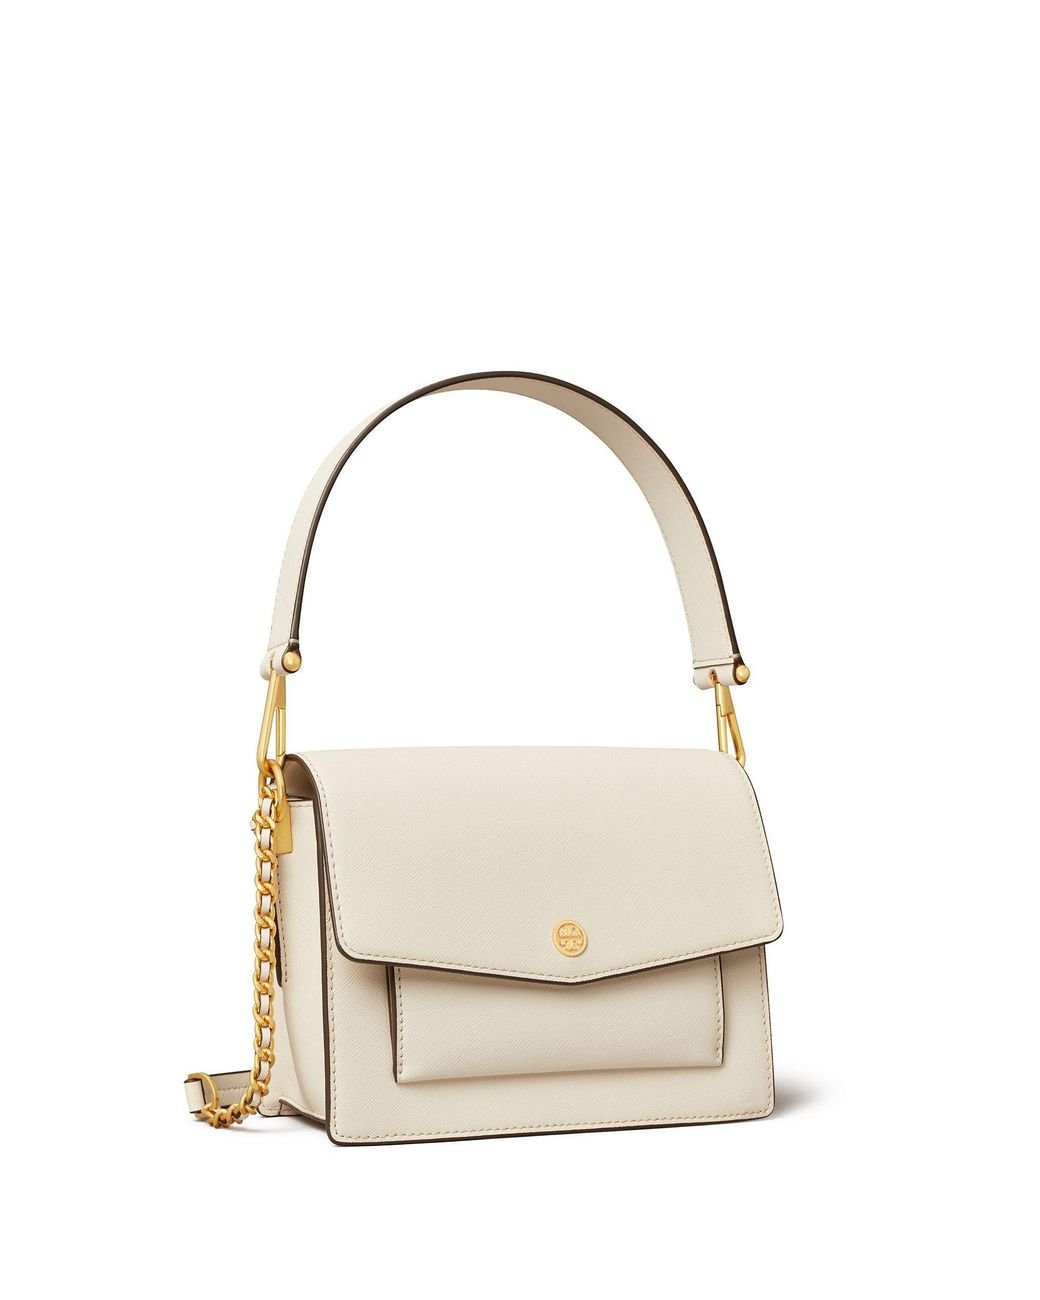 Robinson Convertible Shoulder Bag by Tory Burch Accessories for